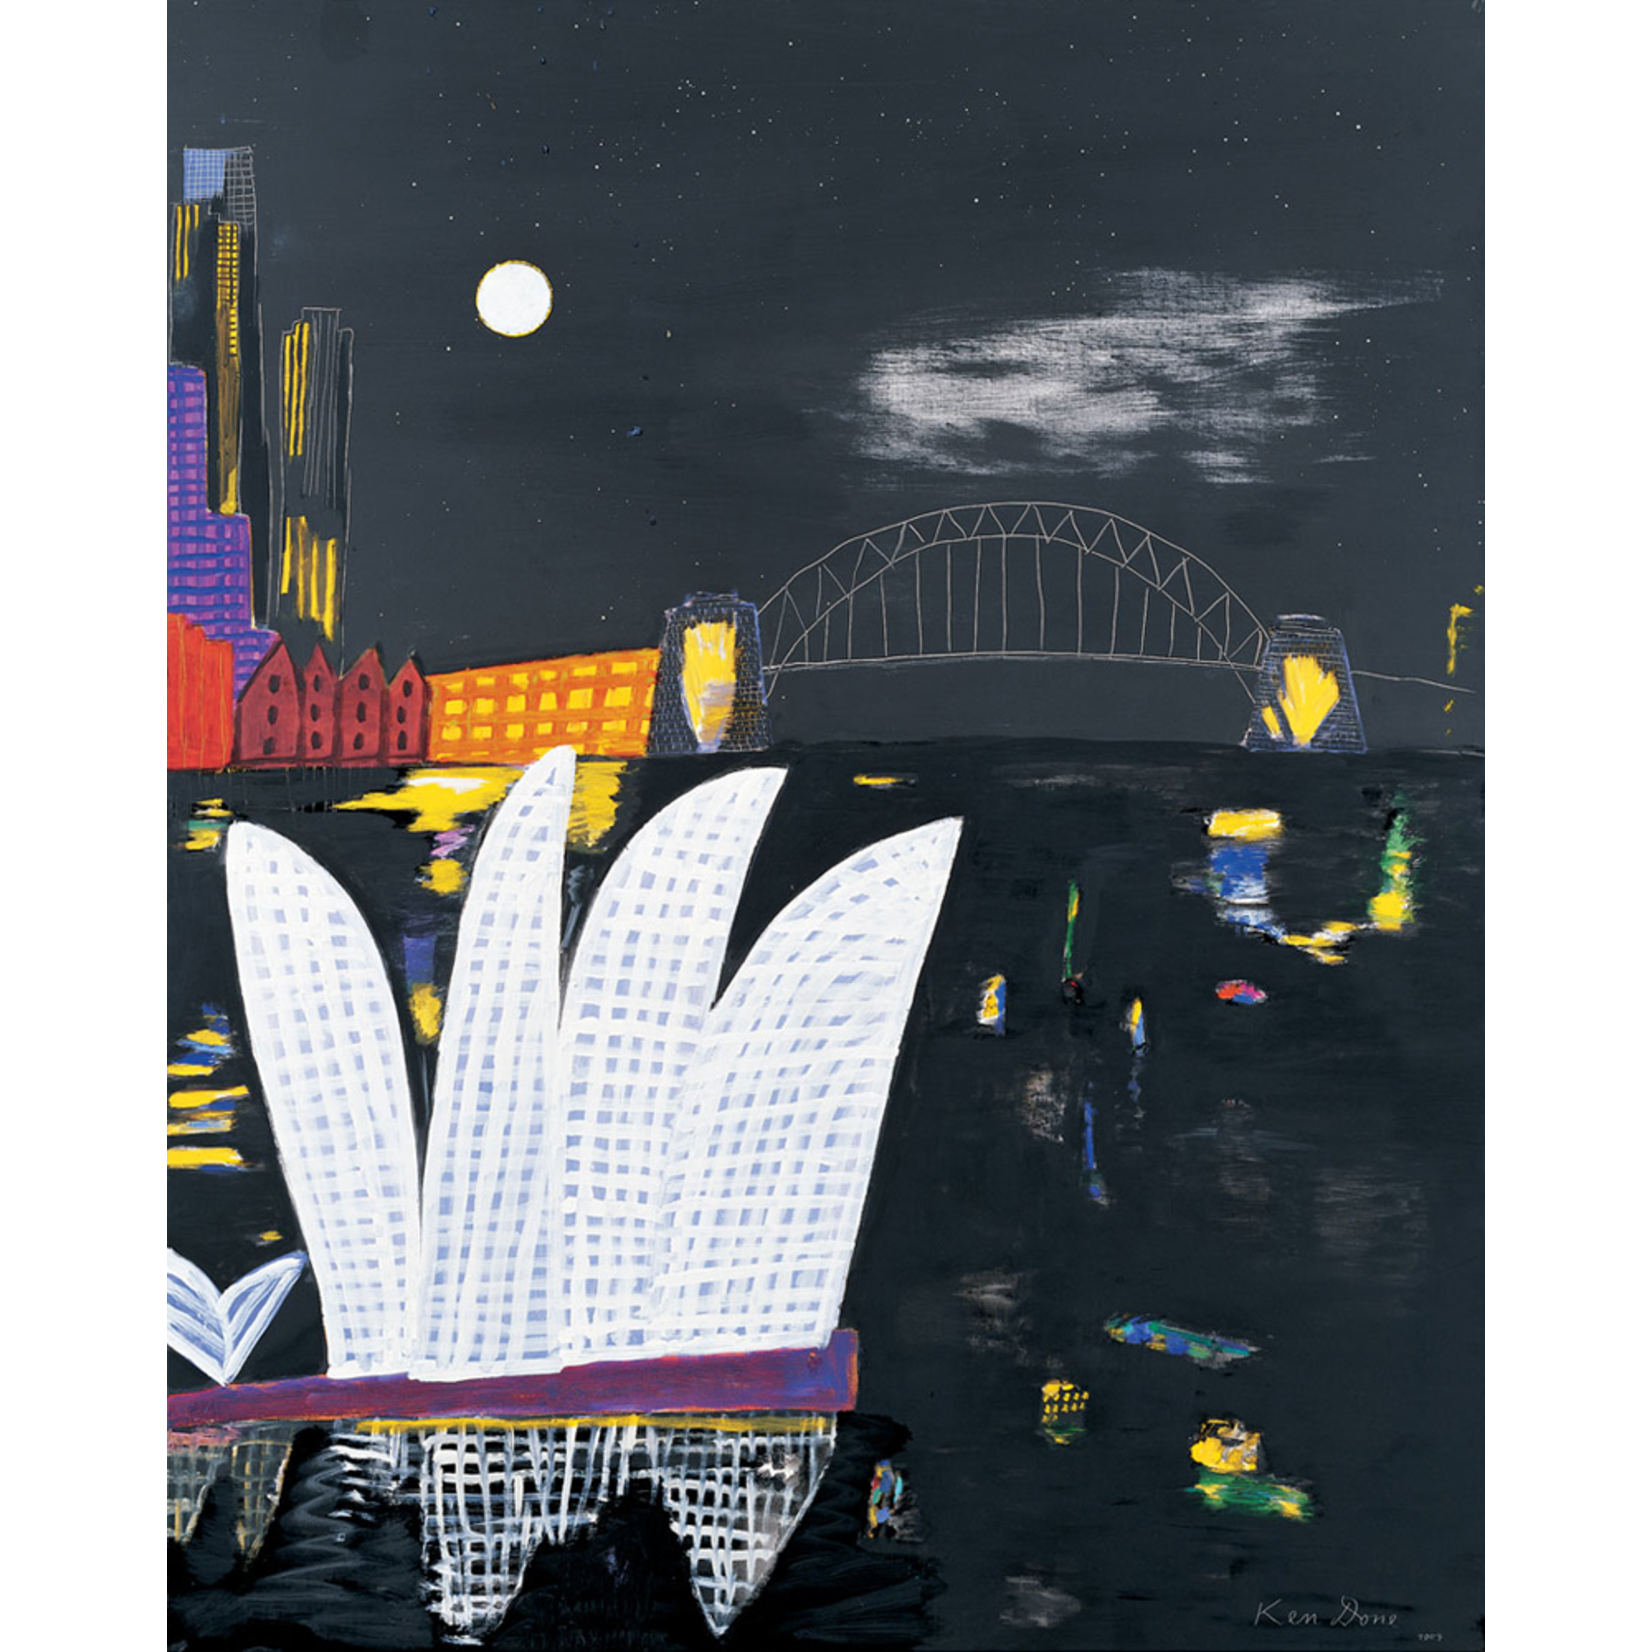 Limited Edition Prints Opera House moon, 2004